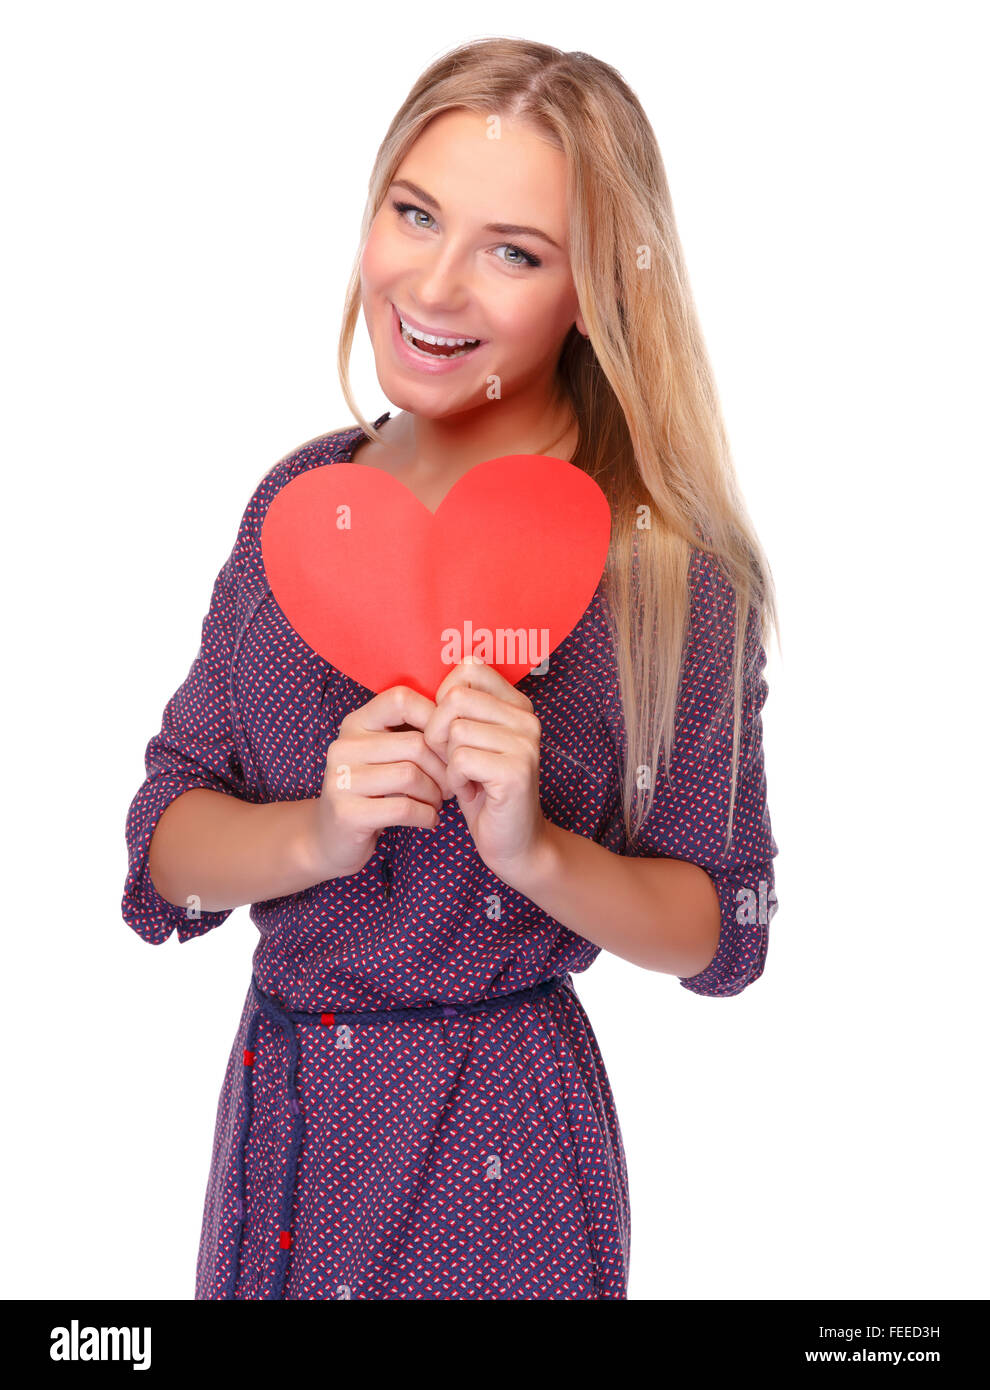 Cute cheerful girl with red paper heart in hands isolated on white background, symbol of health and love Stock Photo